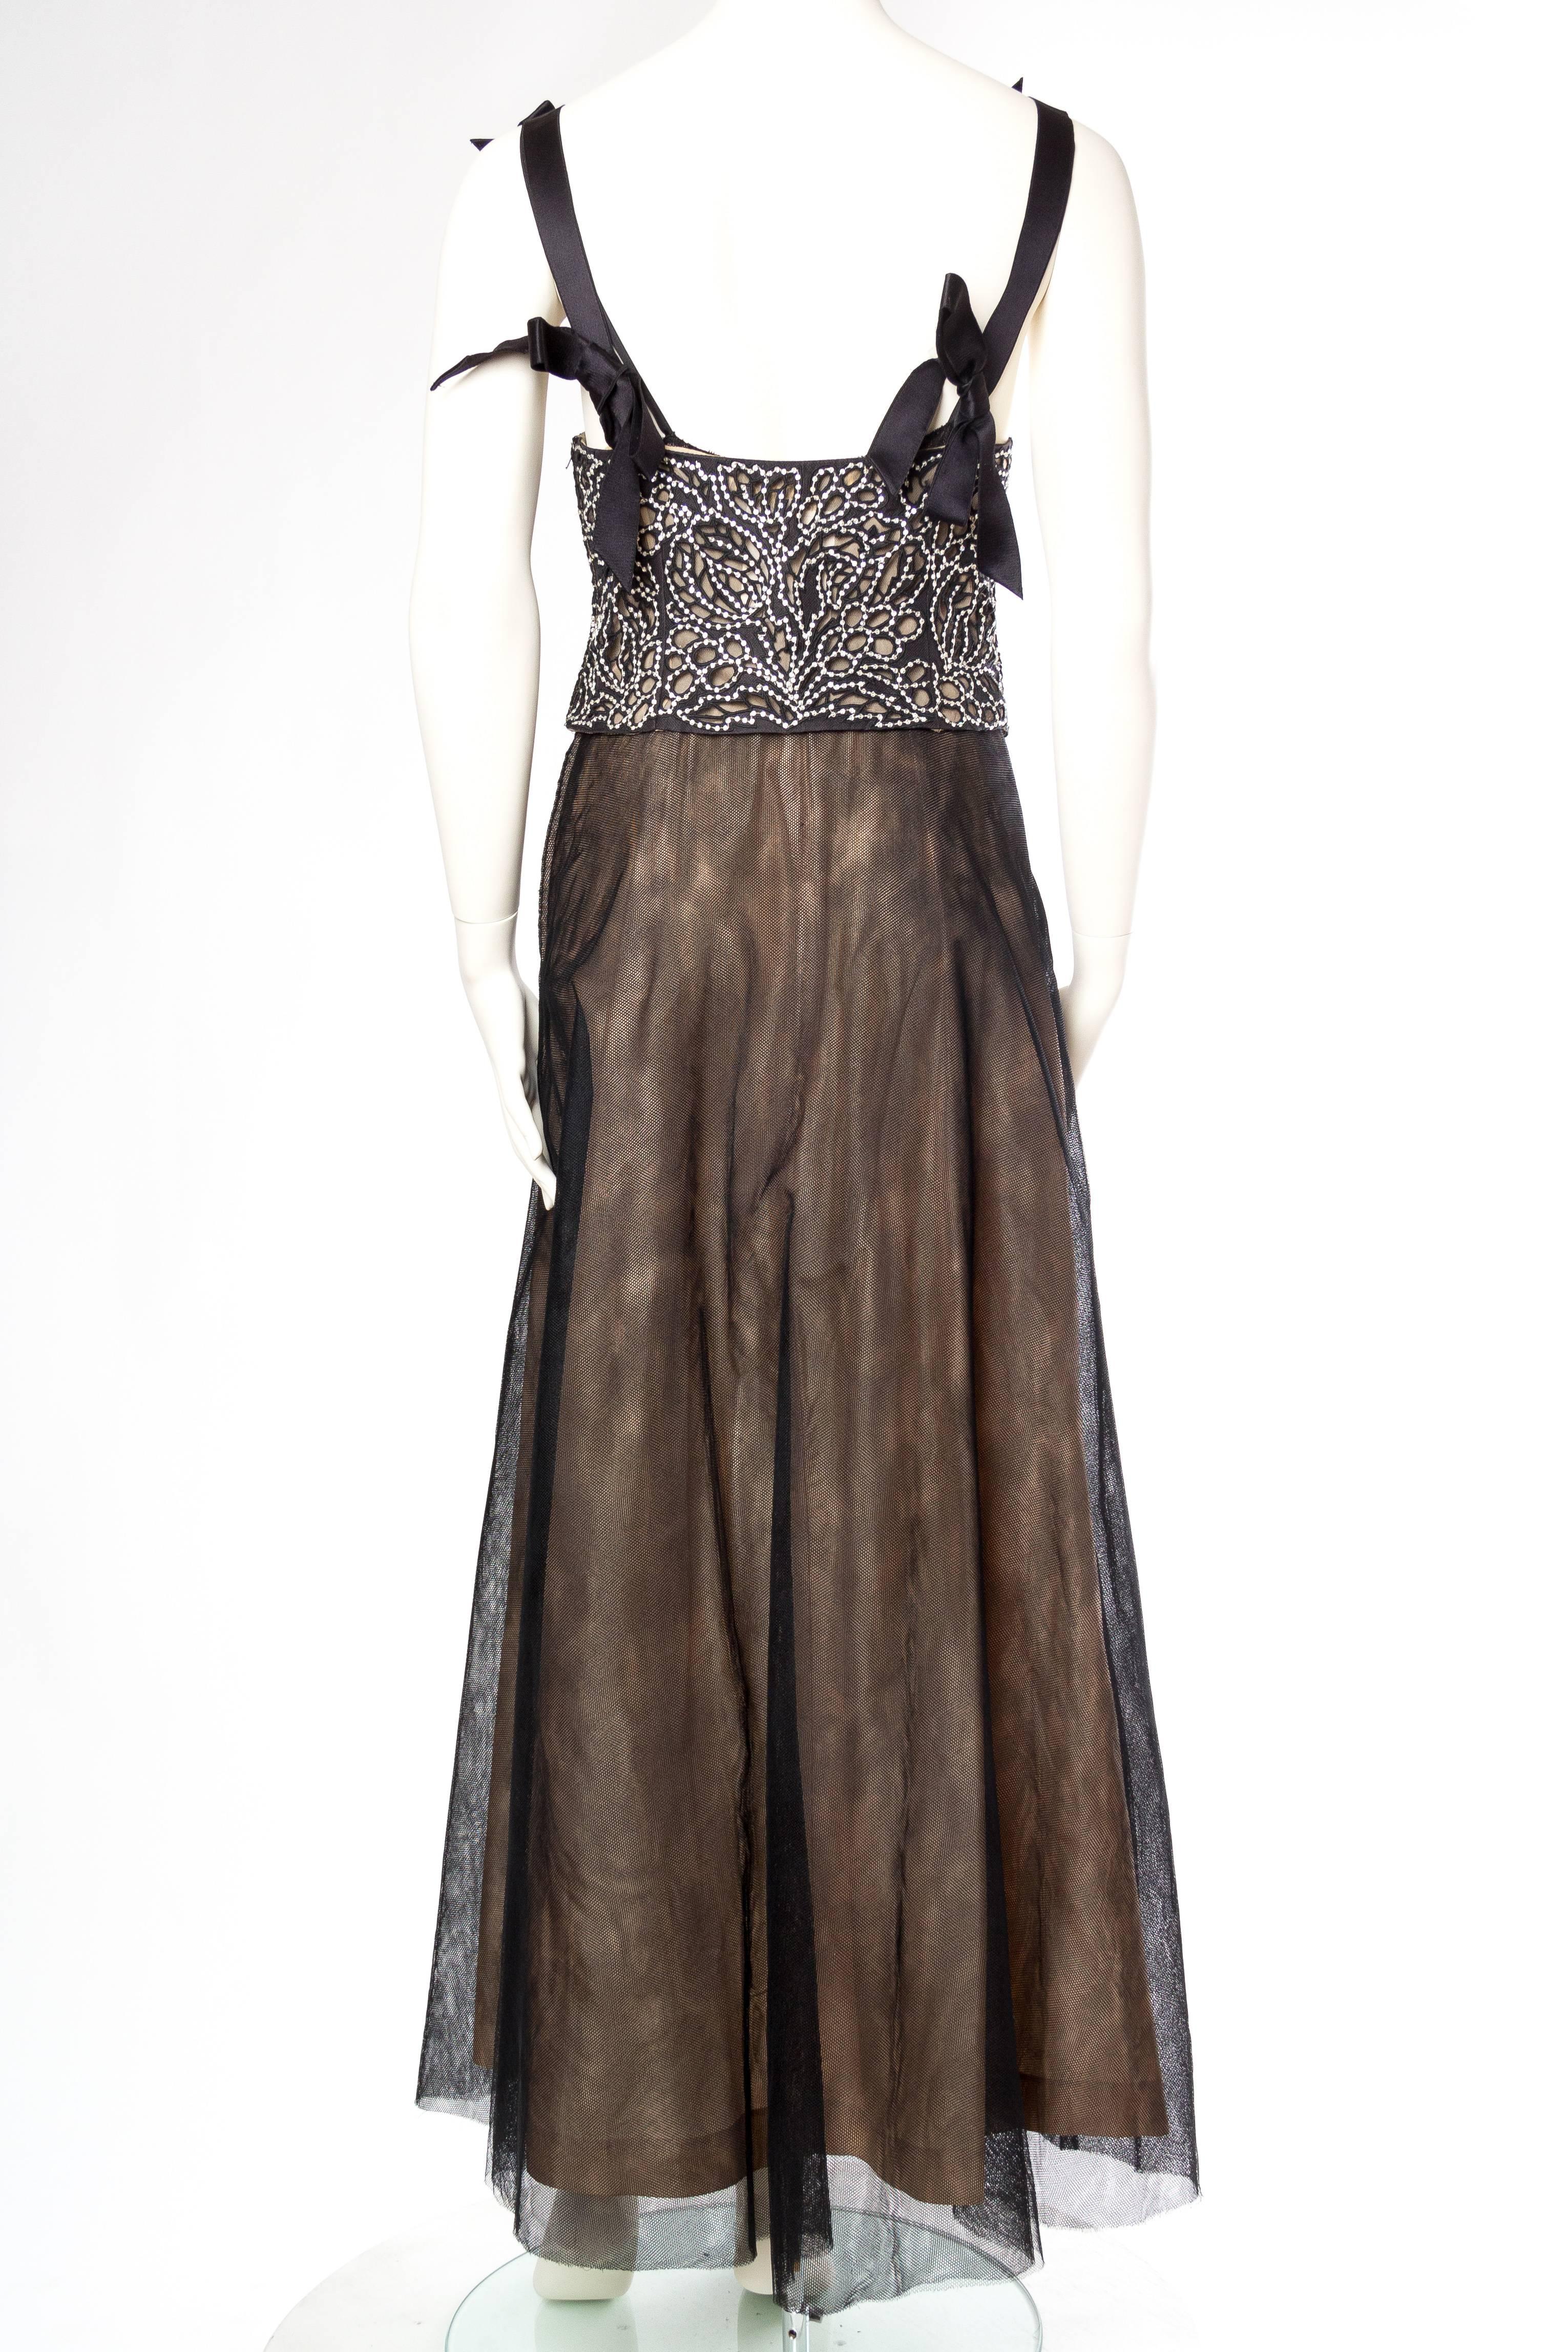 1980 VALENTINO Black Silk Tulle Couture Quality Gown With Lace And ...